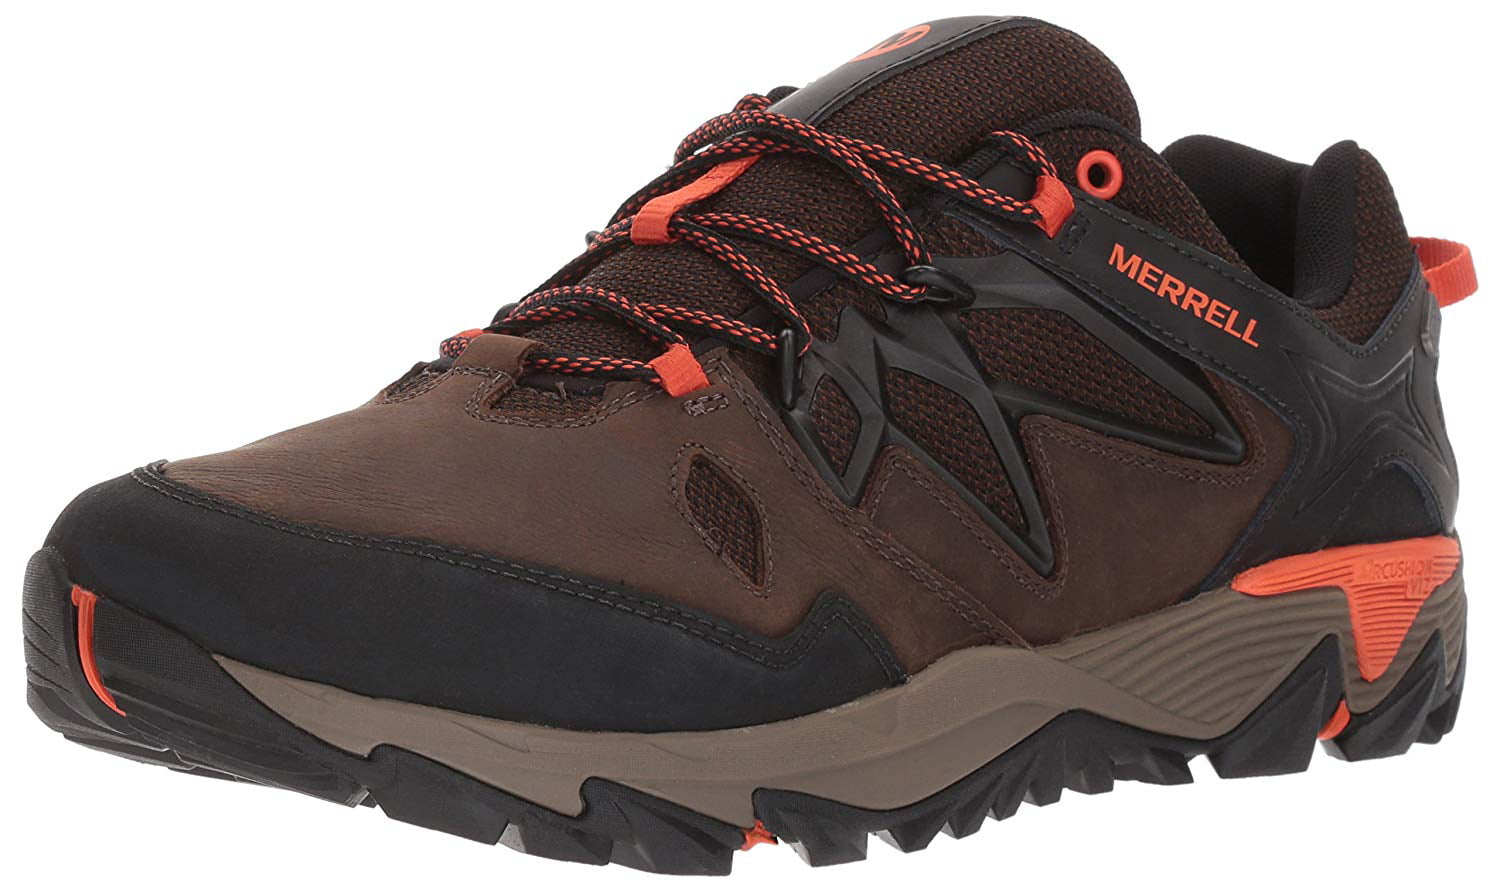 Merrell Mens All Out Blaze 2 GORE-TEX Walking Shoes Blue Sports Outdoors 